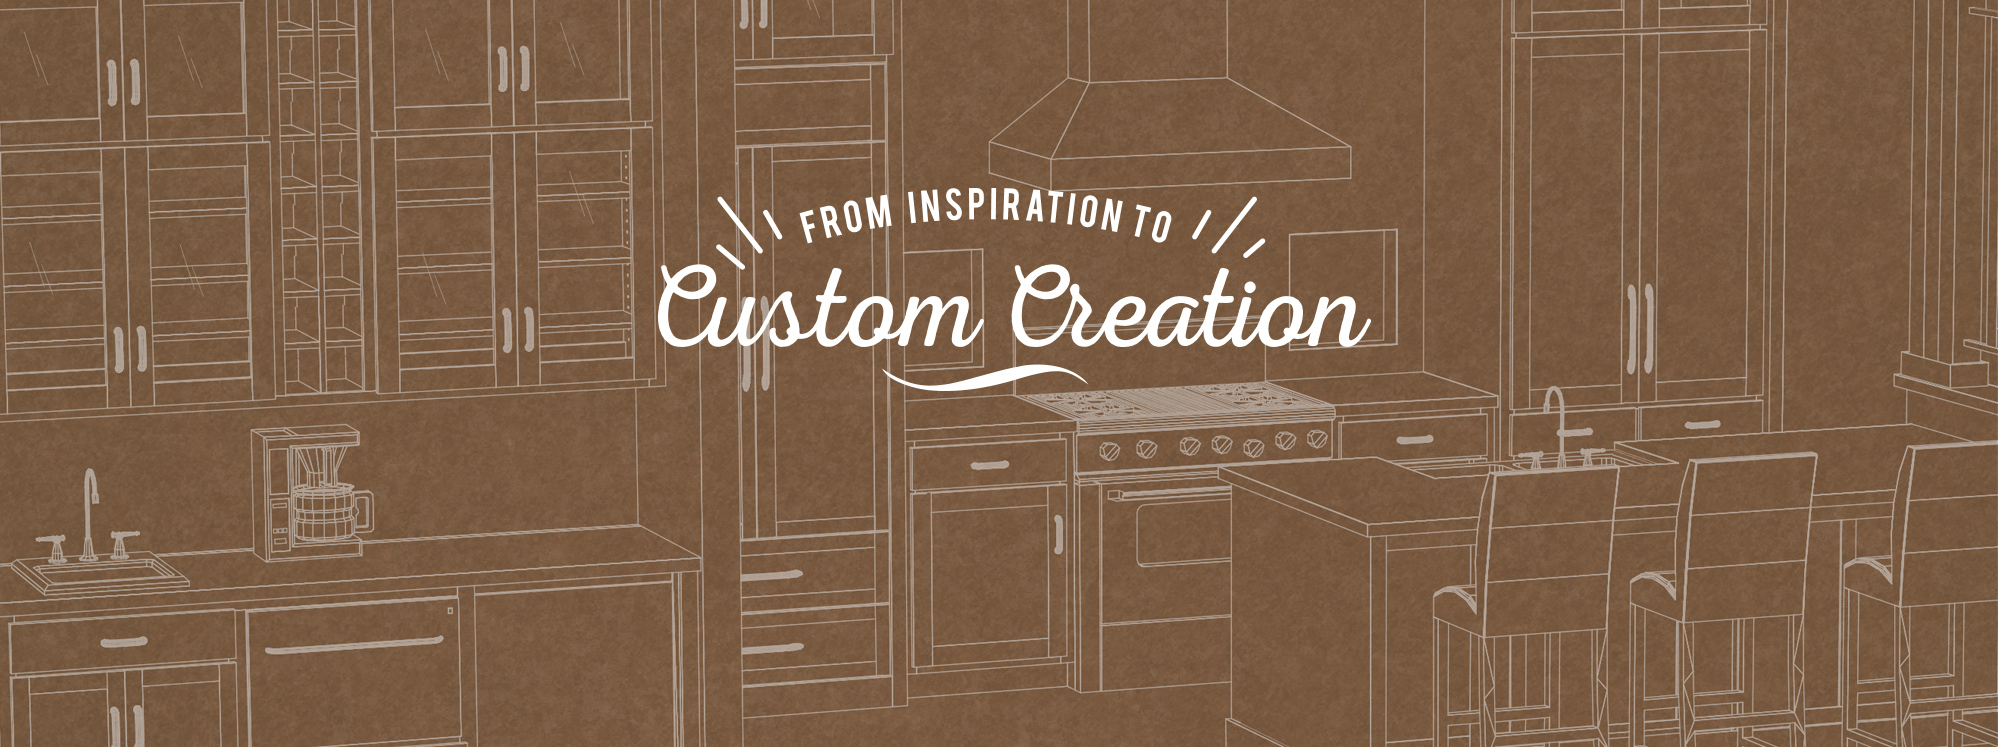 From Inspiration to Custom Creation